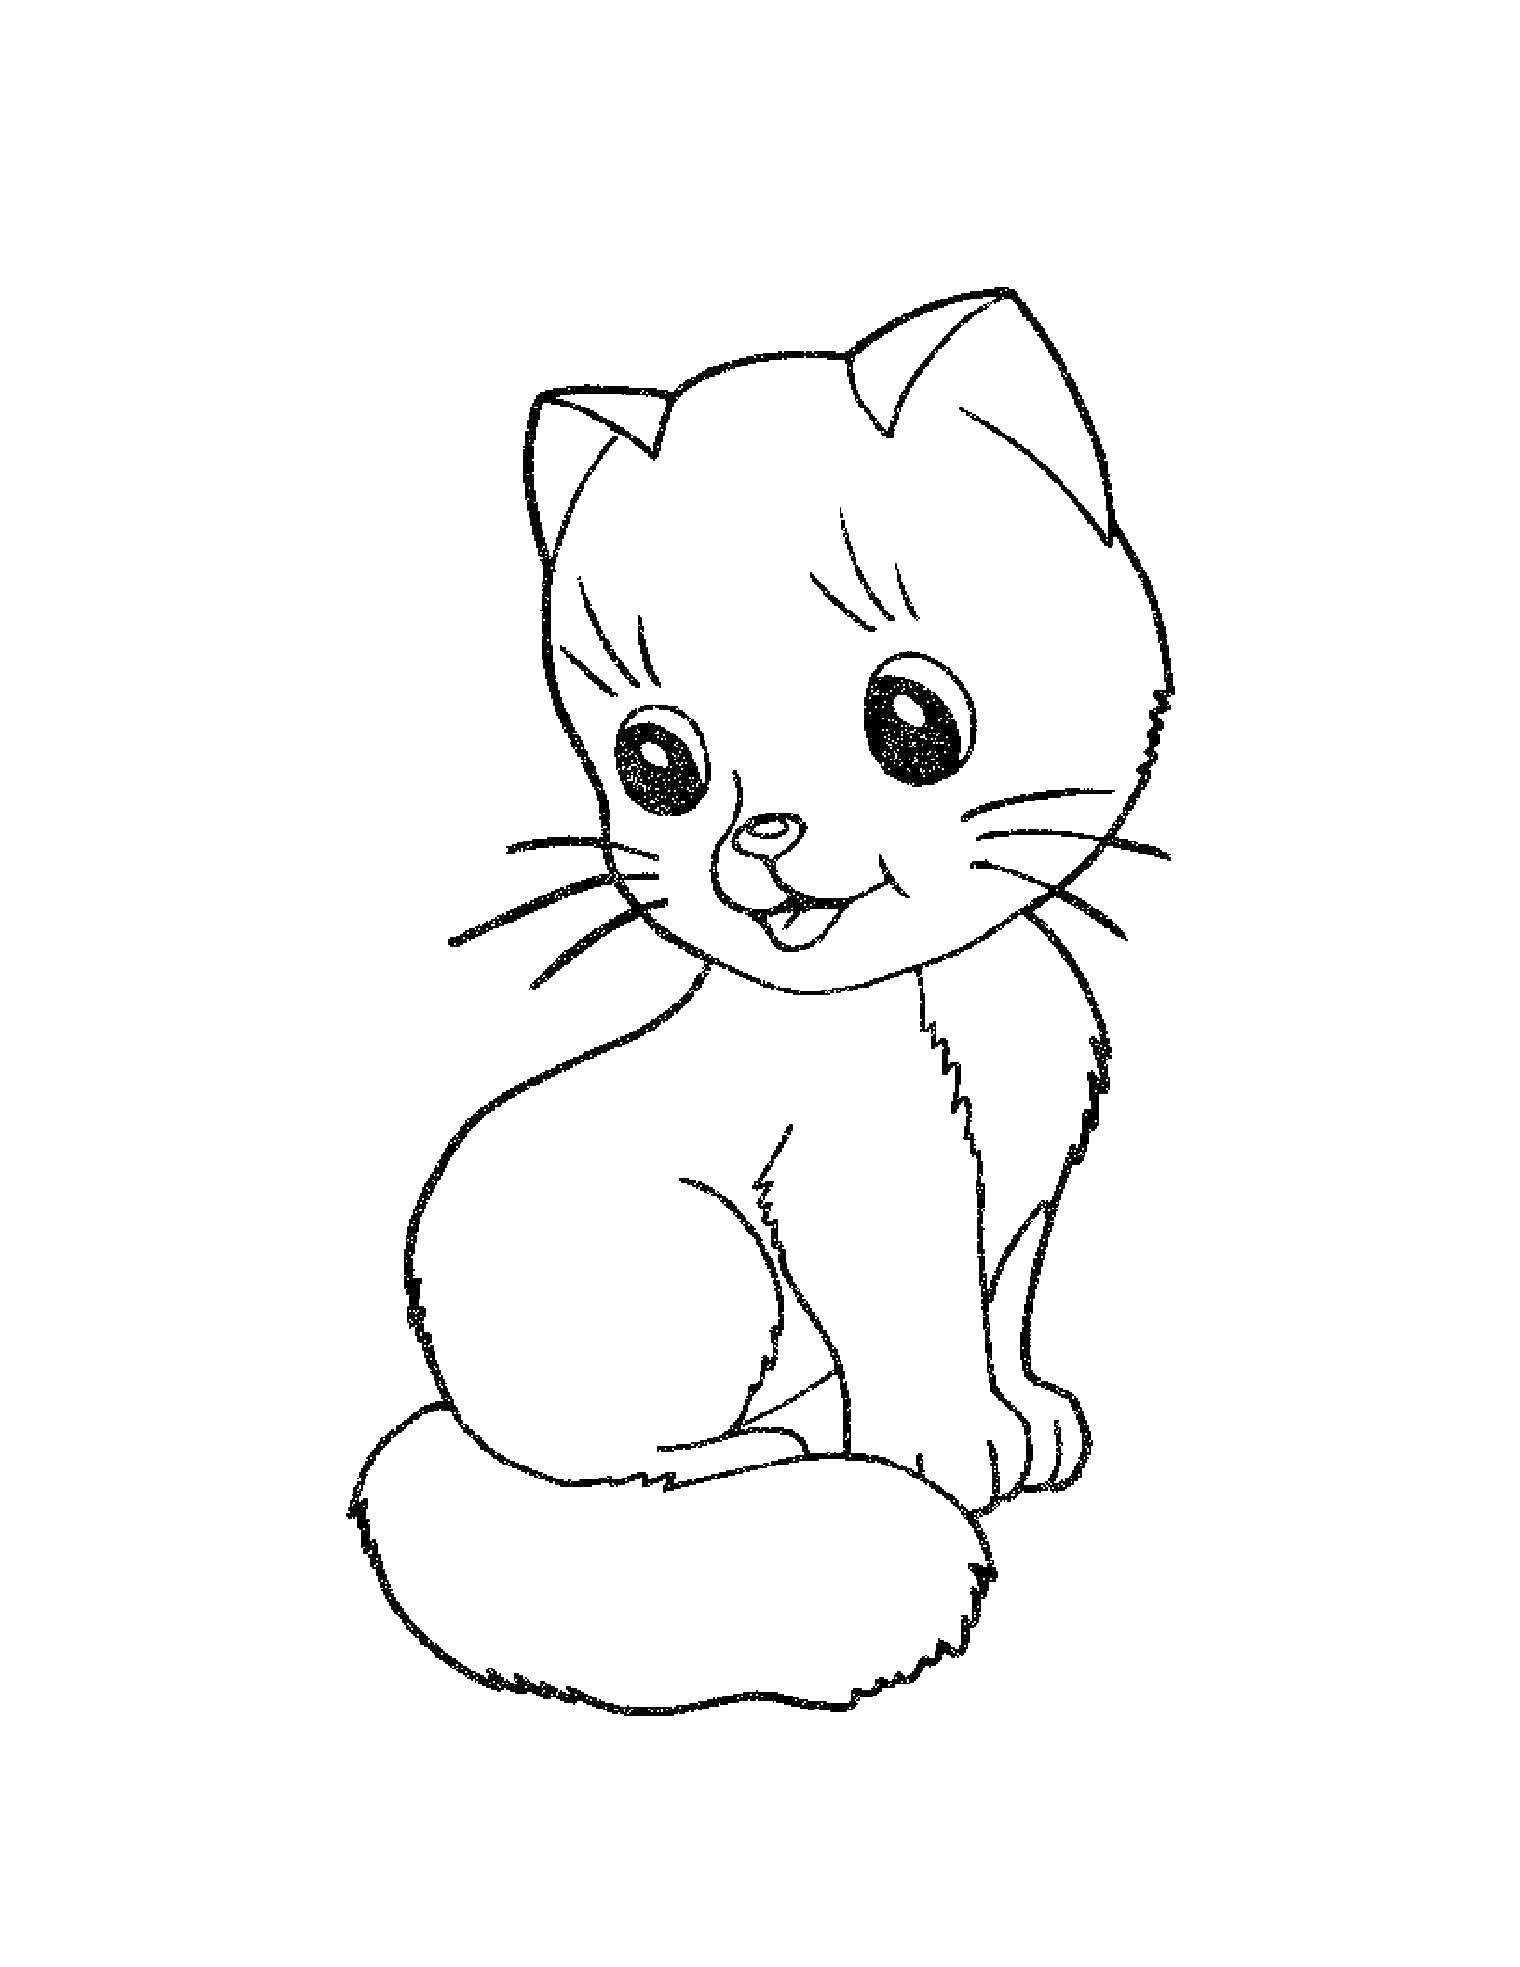 Coloring Cat. Category cute animals. Tags:  cat, kittens.